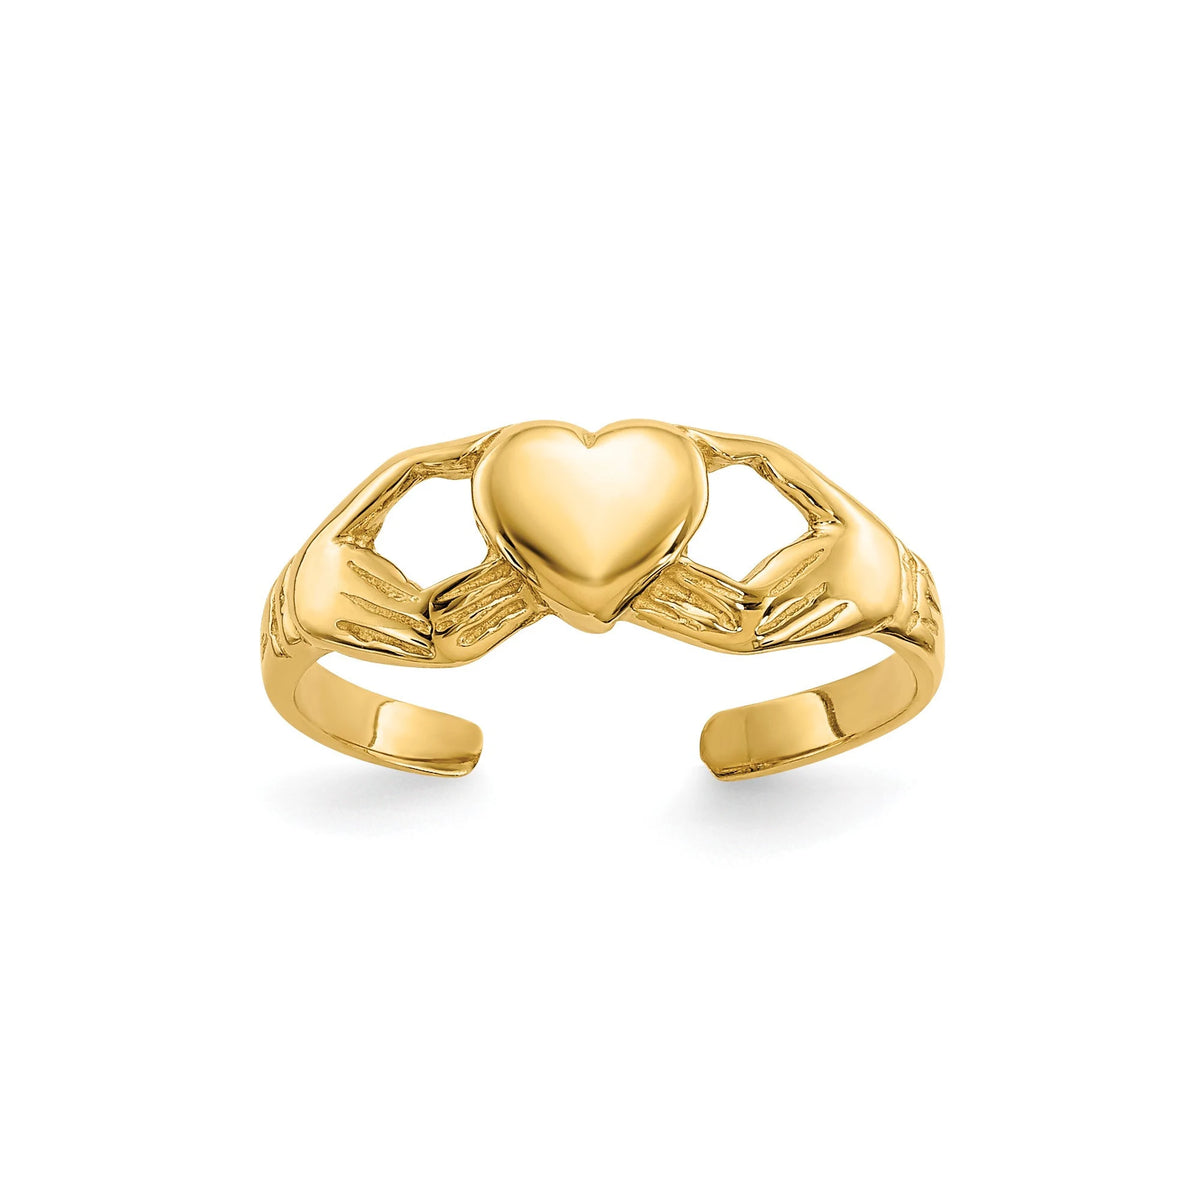 14k Yellow Gold Solid Polished Claddagh  Toe Ring - Gift Box Included - Made in USA